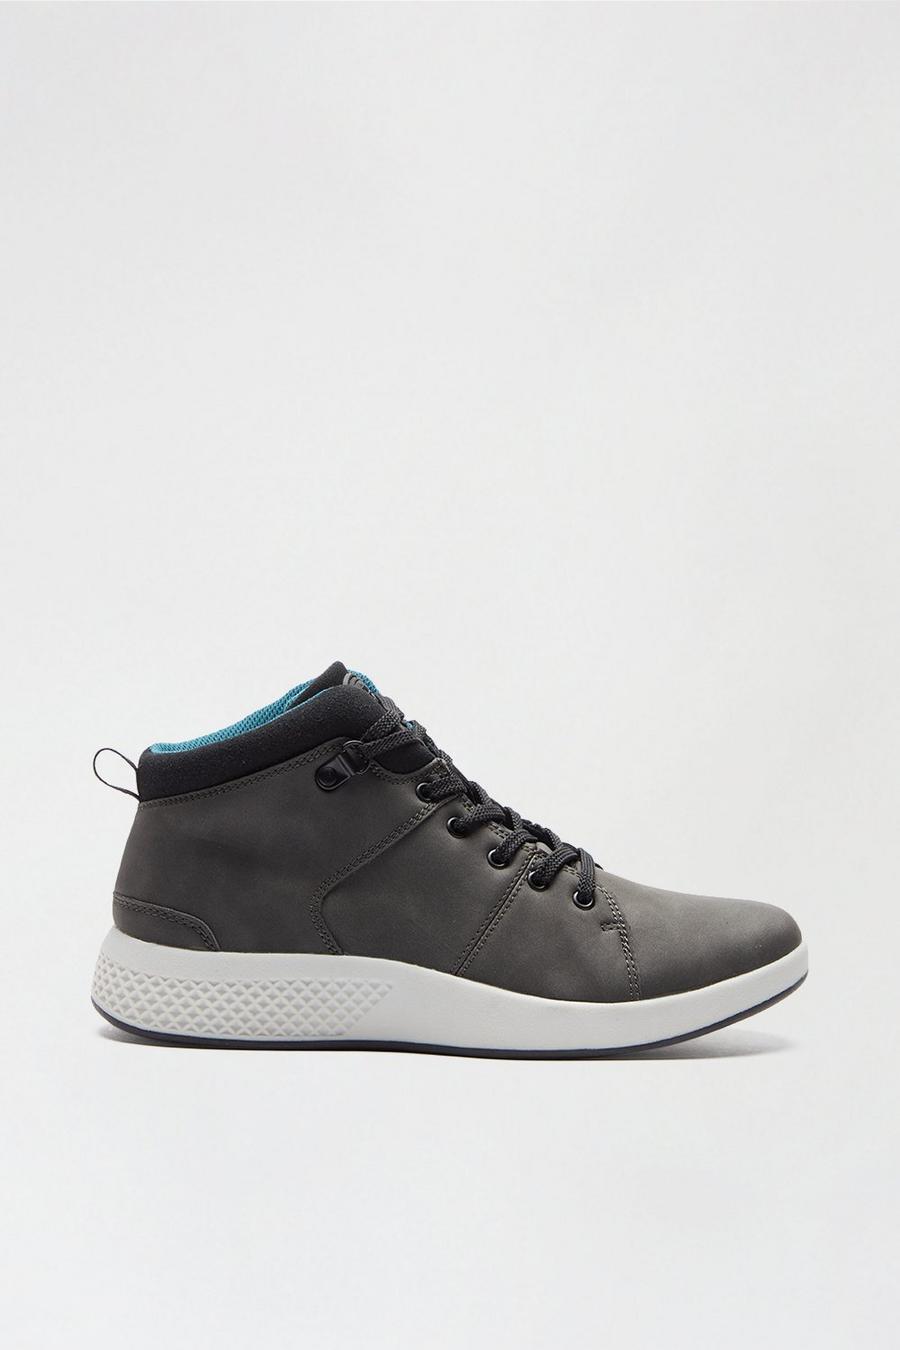 Grey Leather Look Sport Boots